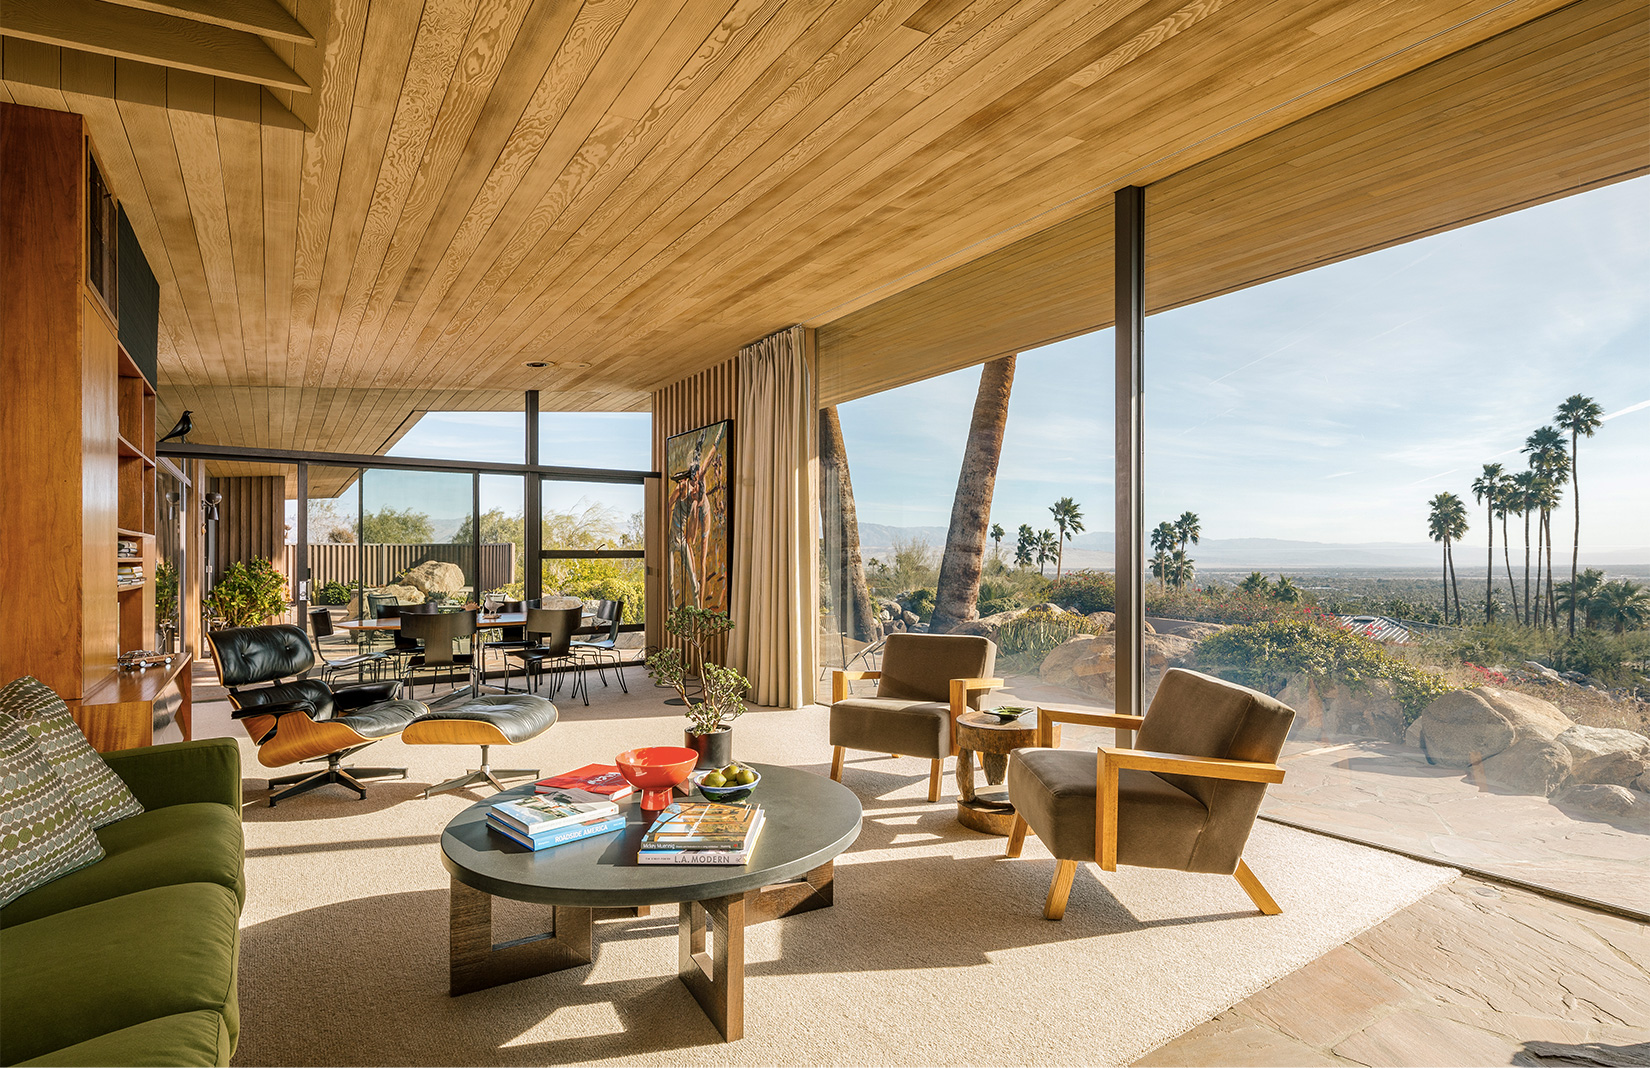 7 Of The Best Midcentury Homes For Sale In The Us